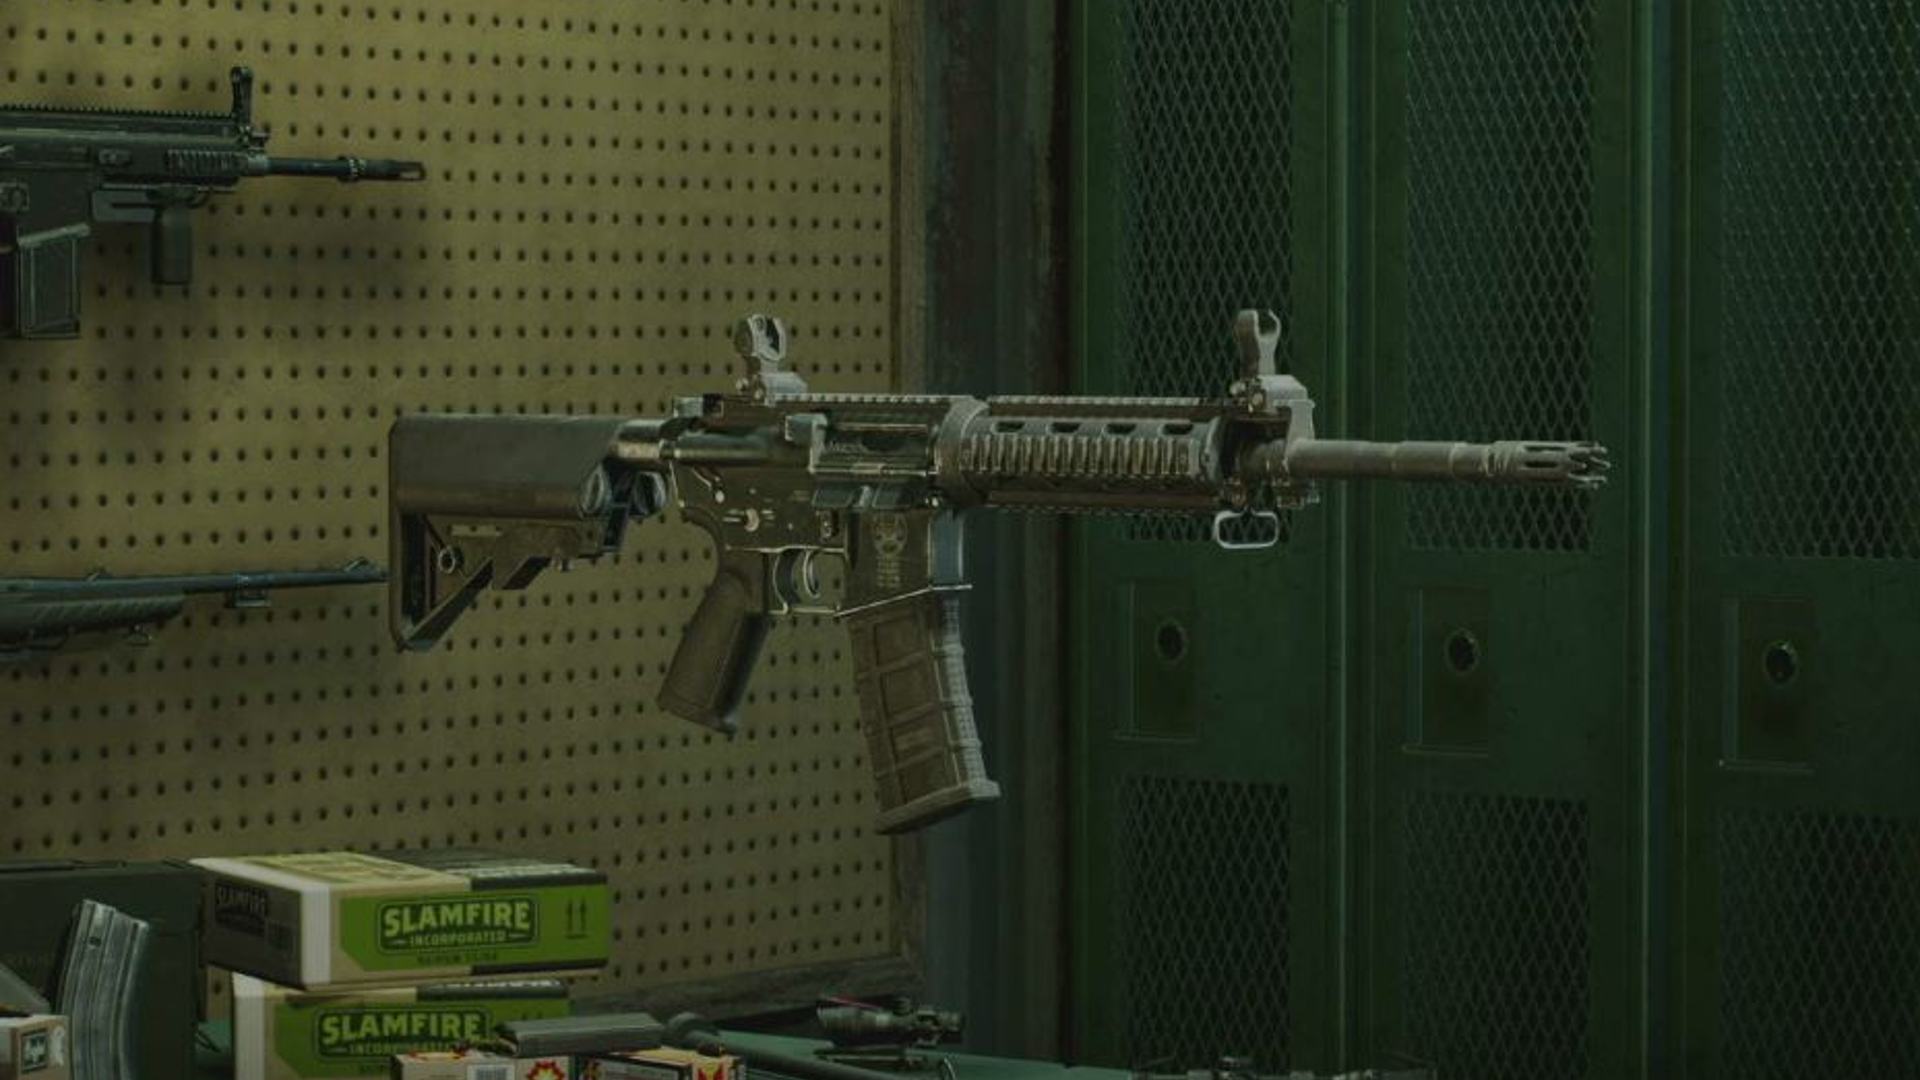 Back 4 Blood Best Weapons: A shot of the M4 Carbine weapon in the menu.